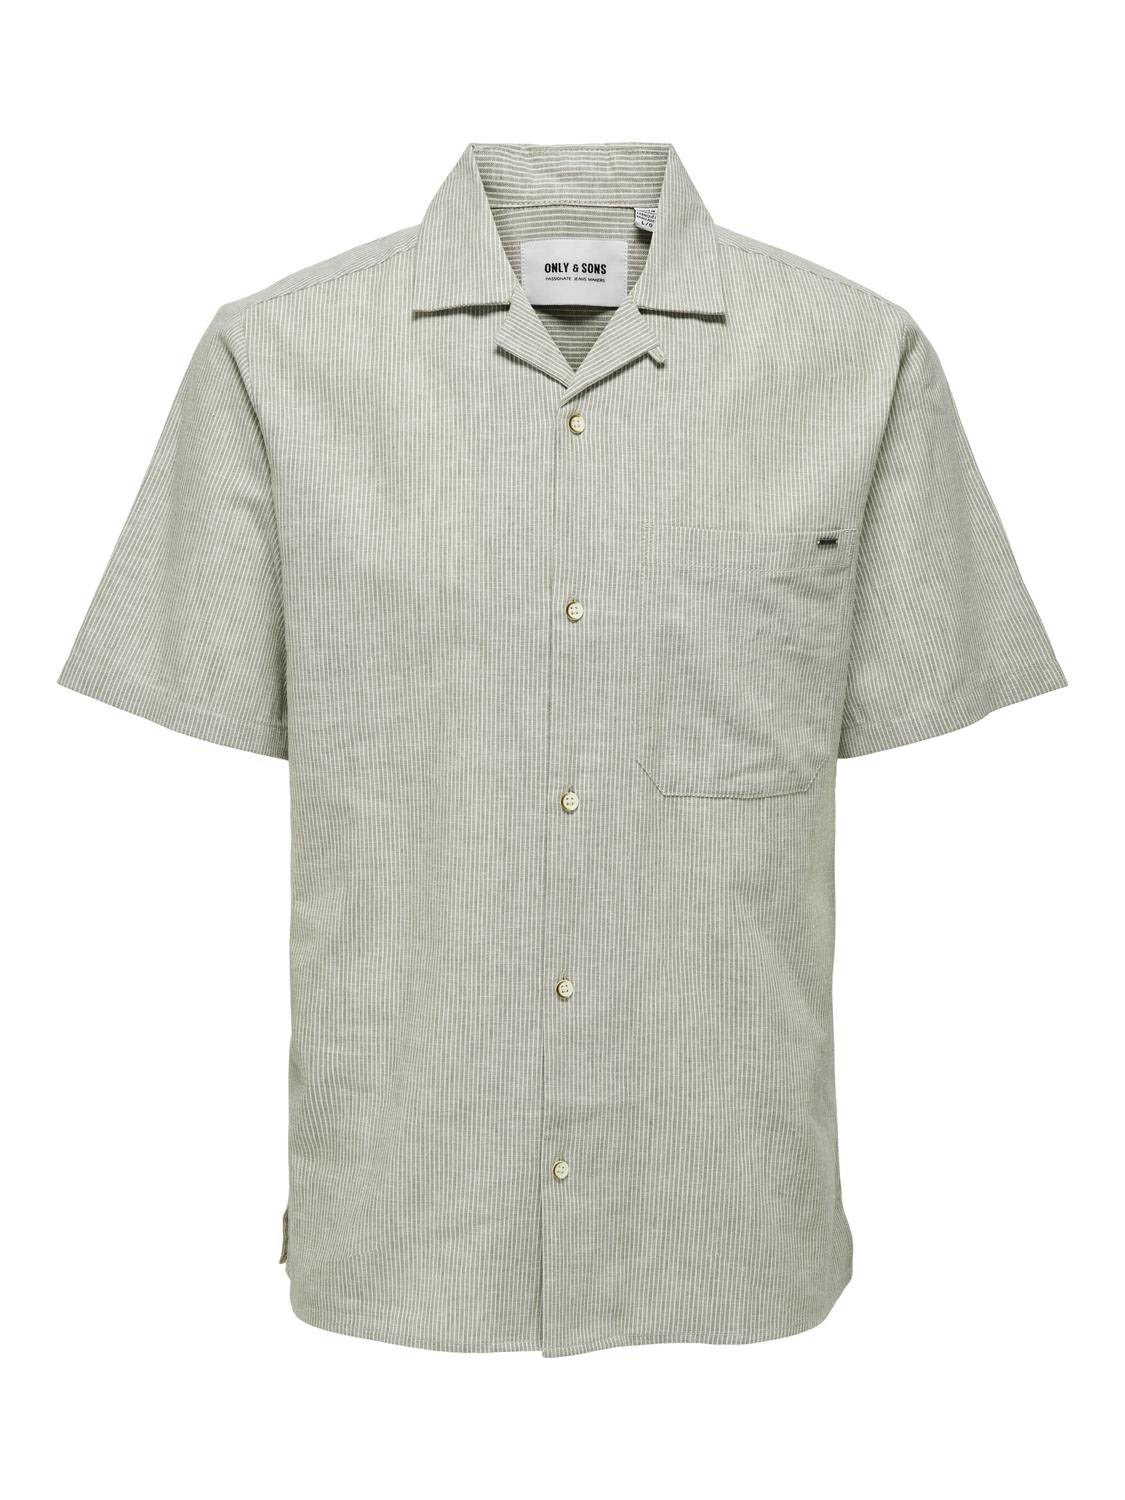 Only and Sons Onseye Resortcollar 0136 Shirt